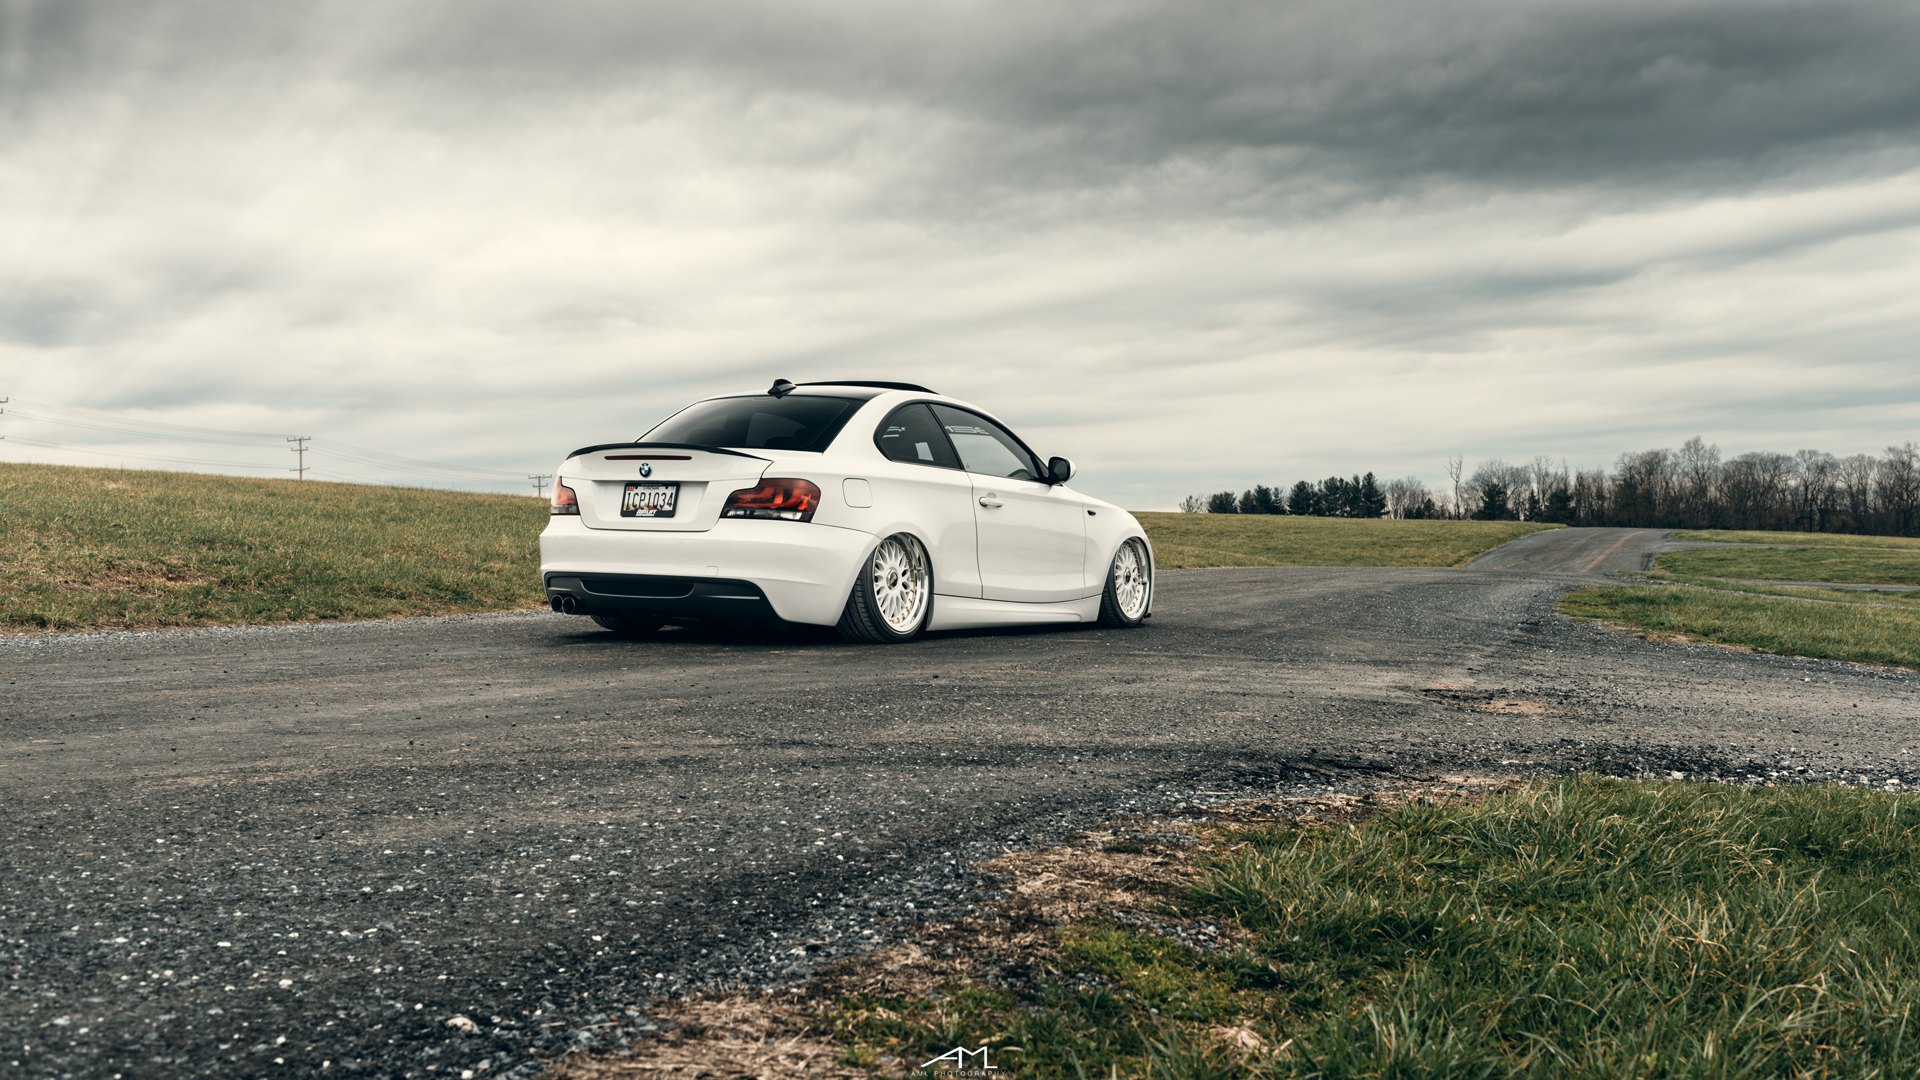 White BMW 1-Series with Factory Style Rear Spoiler - Photo by Arlen Liverman